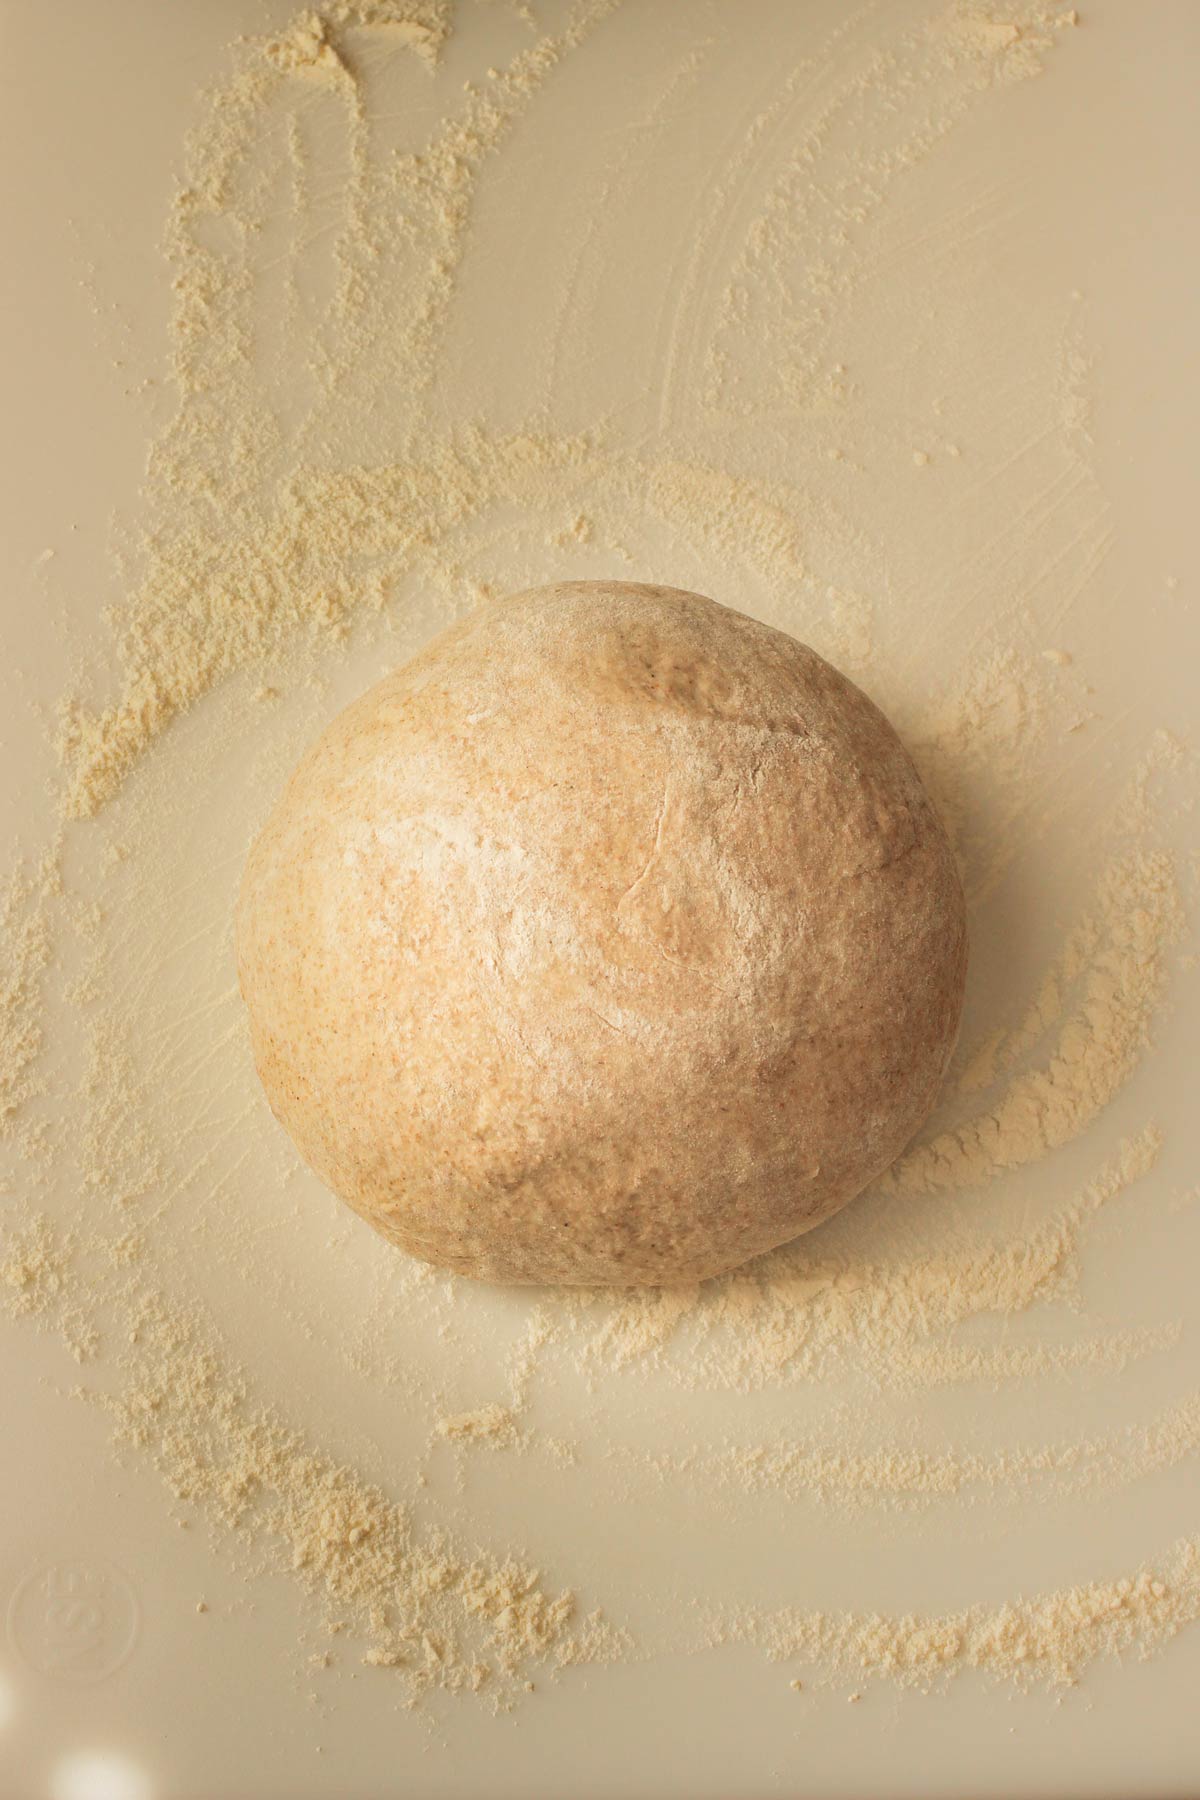 smooth boule resting on the floured work surface.